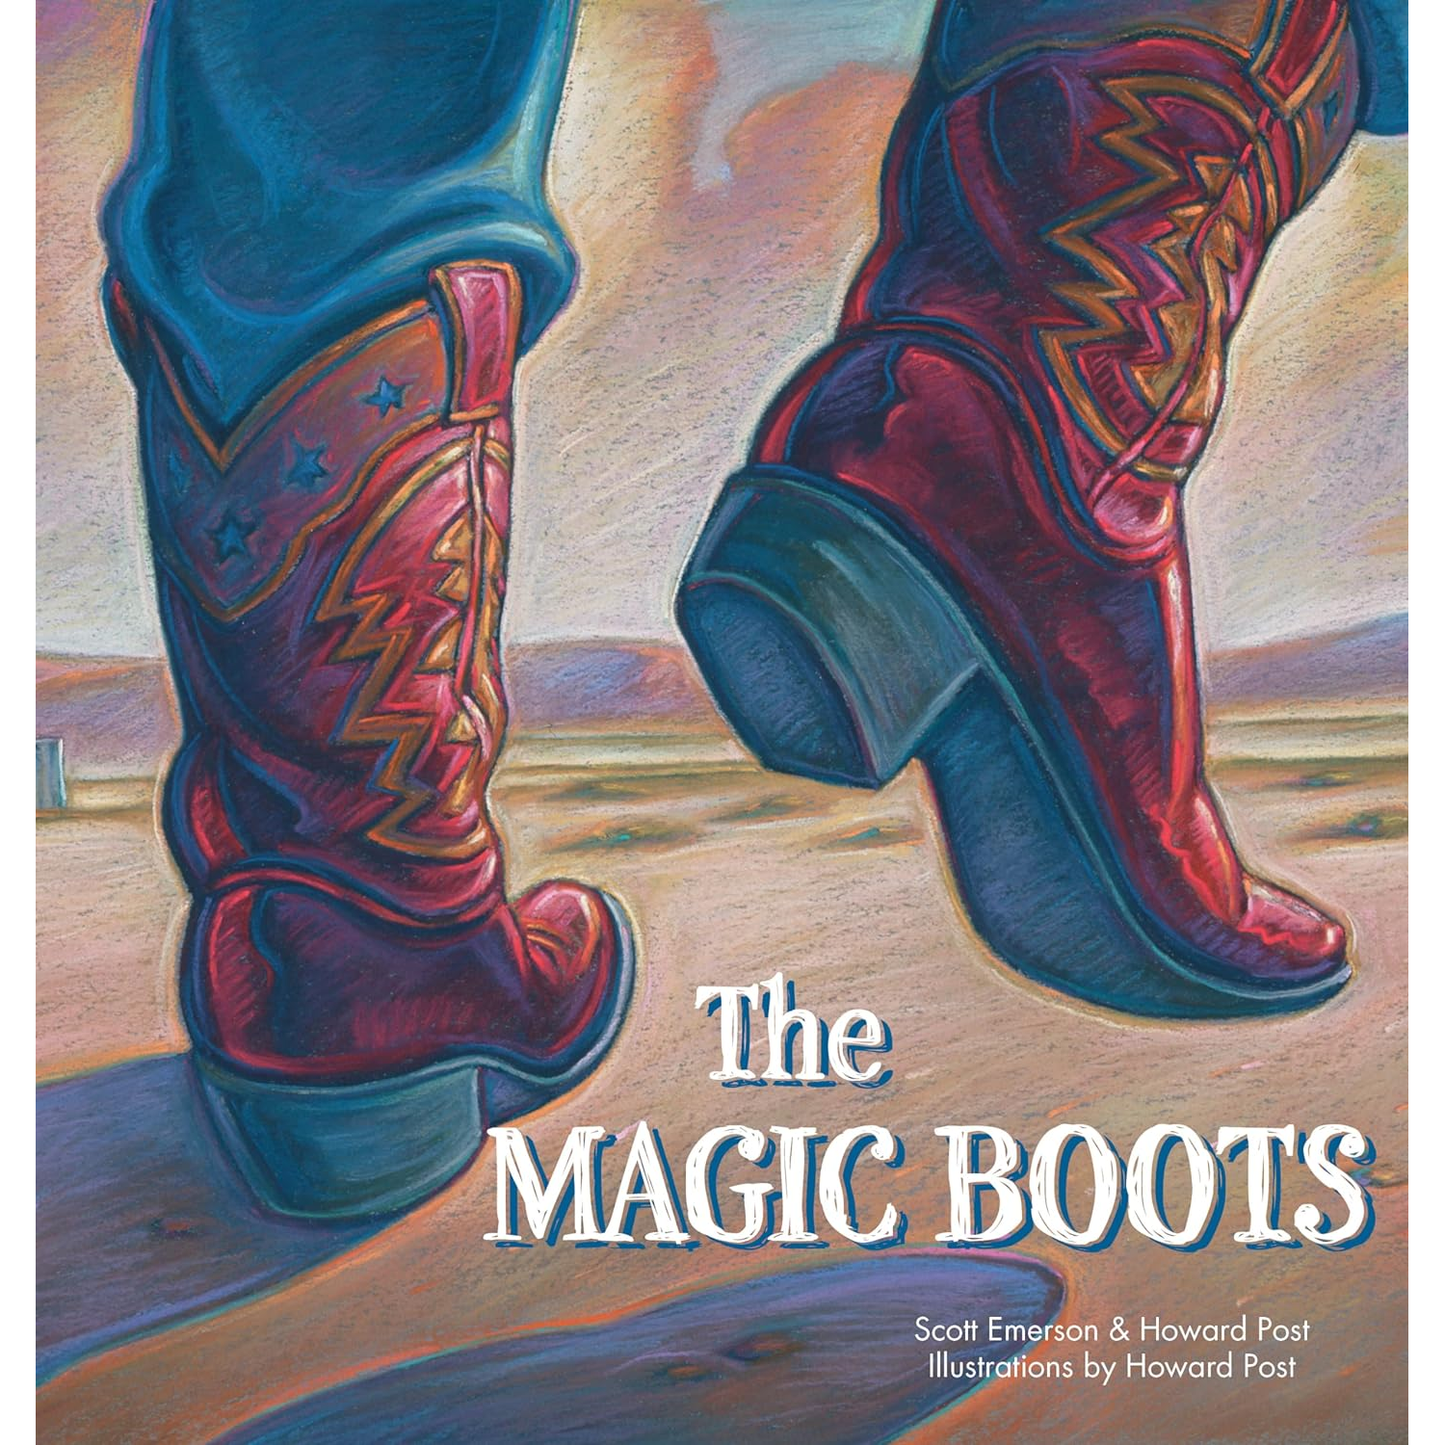 The Magic Boots by Scott Emerson & Howard Post